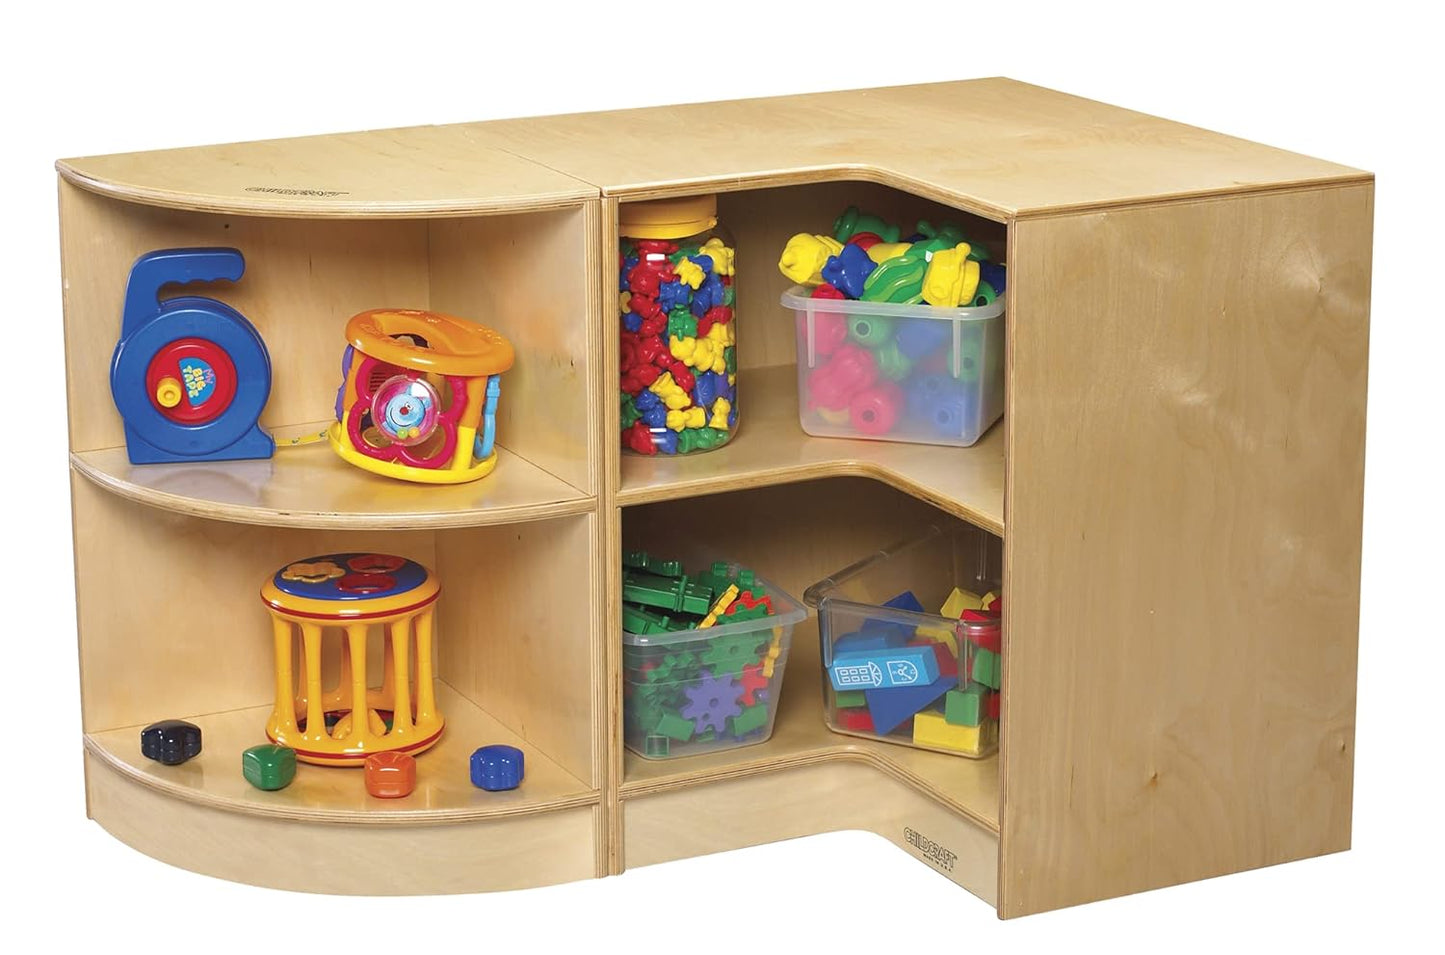 Toddler outside Corner Unit, 14-1/4 X 14-1/4 X 24 Inches